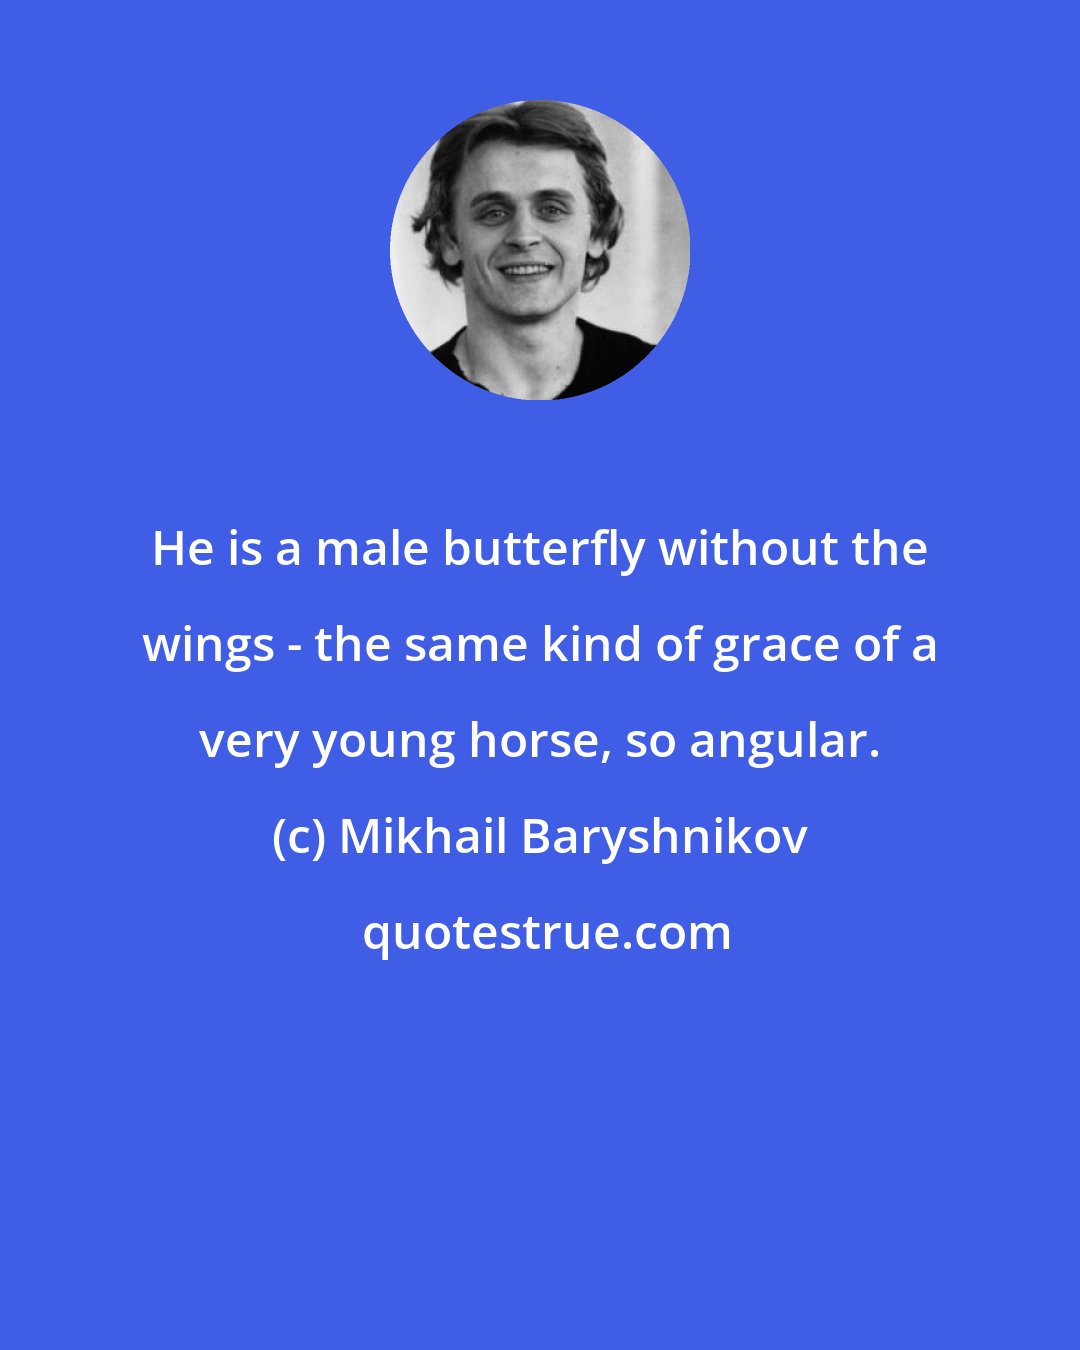 Mikhail Baryshnikov: He is a male butterfly without the wings - the same kind of grace of a very young horse, so angular.